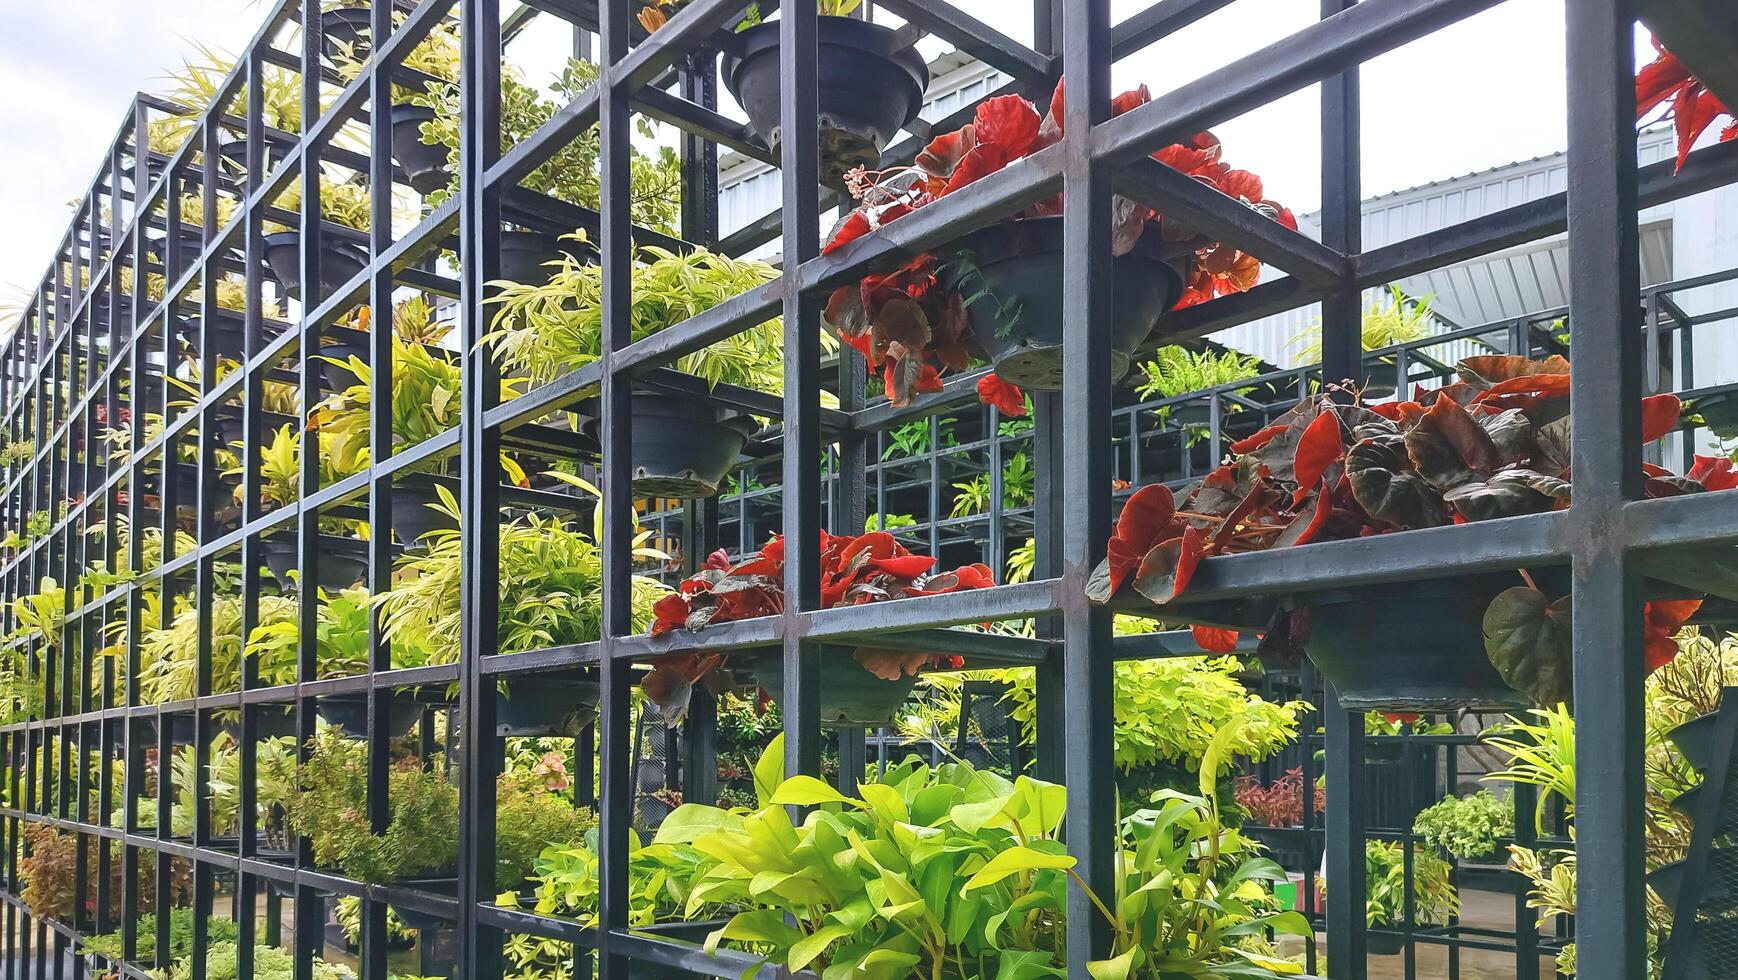 Rows of various ornamental houseplants on steel shelf wall decoration in public park area, widescreen and perspective side view photo